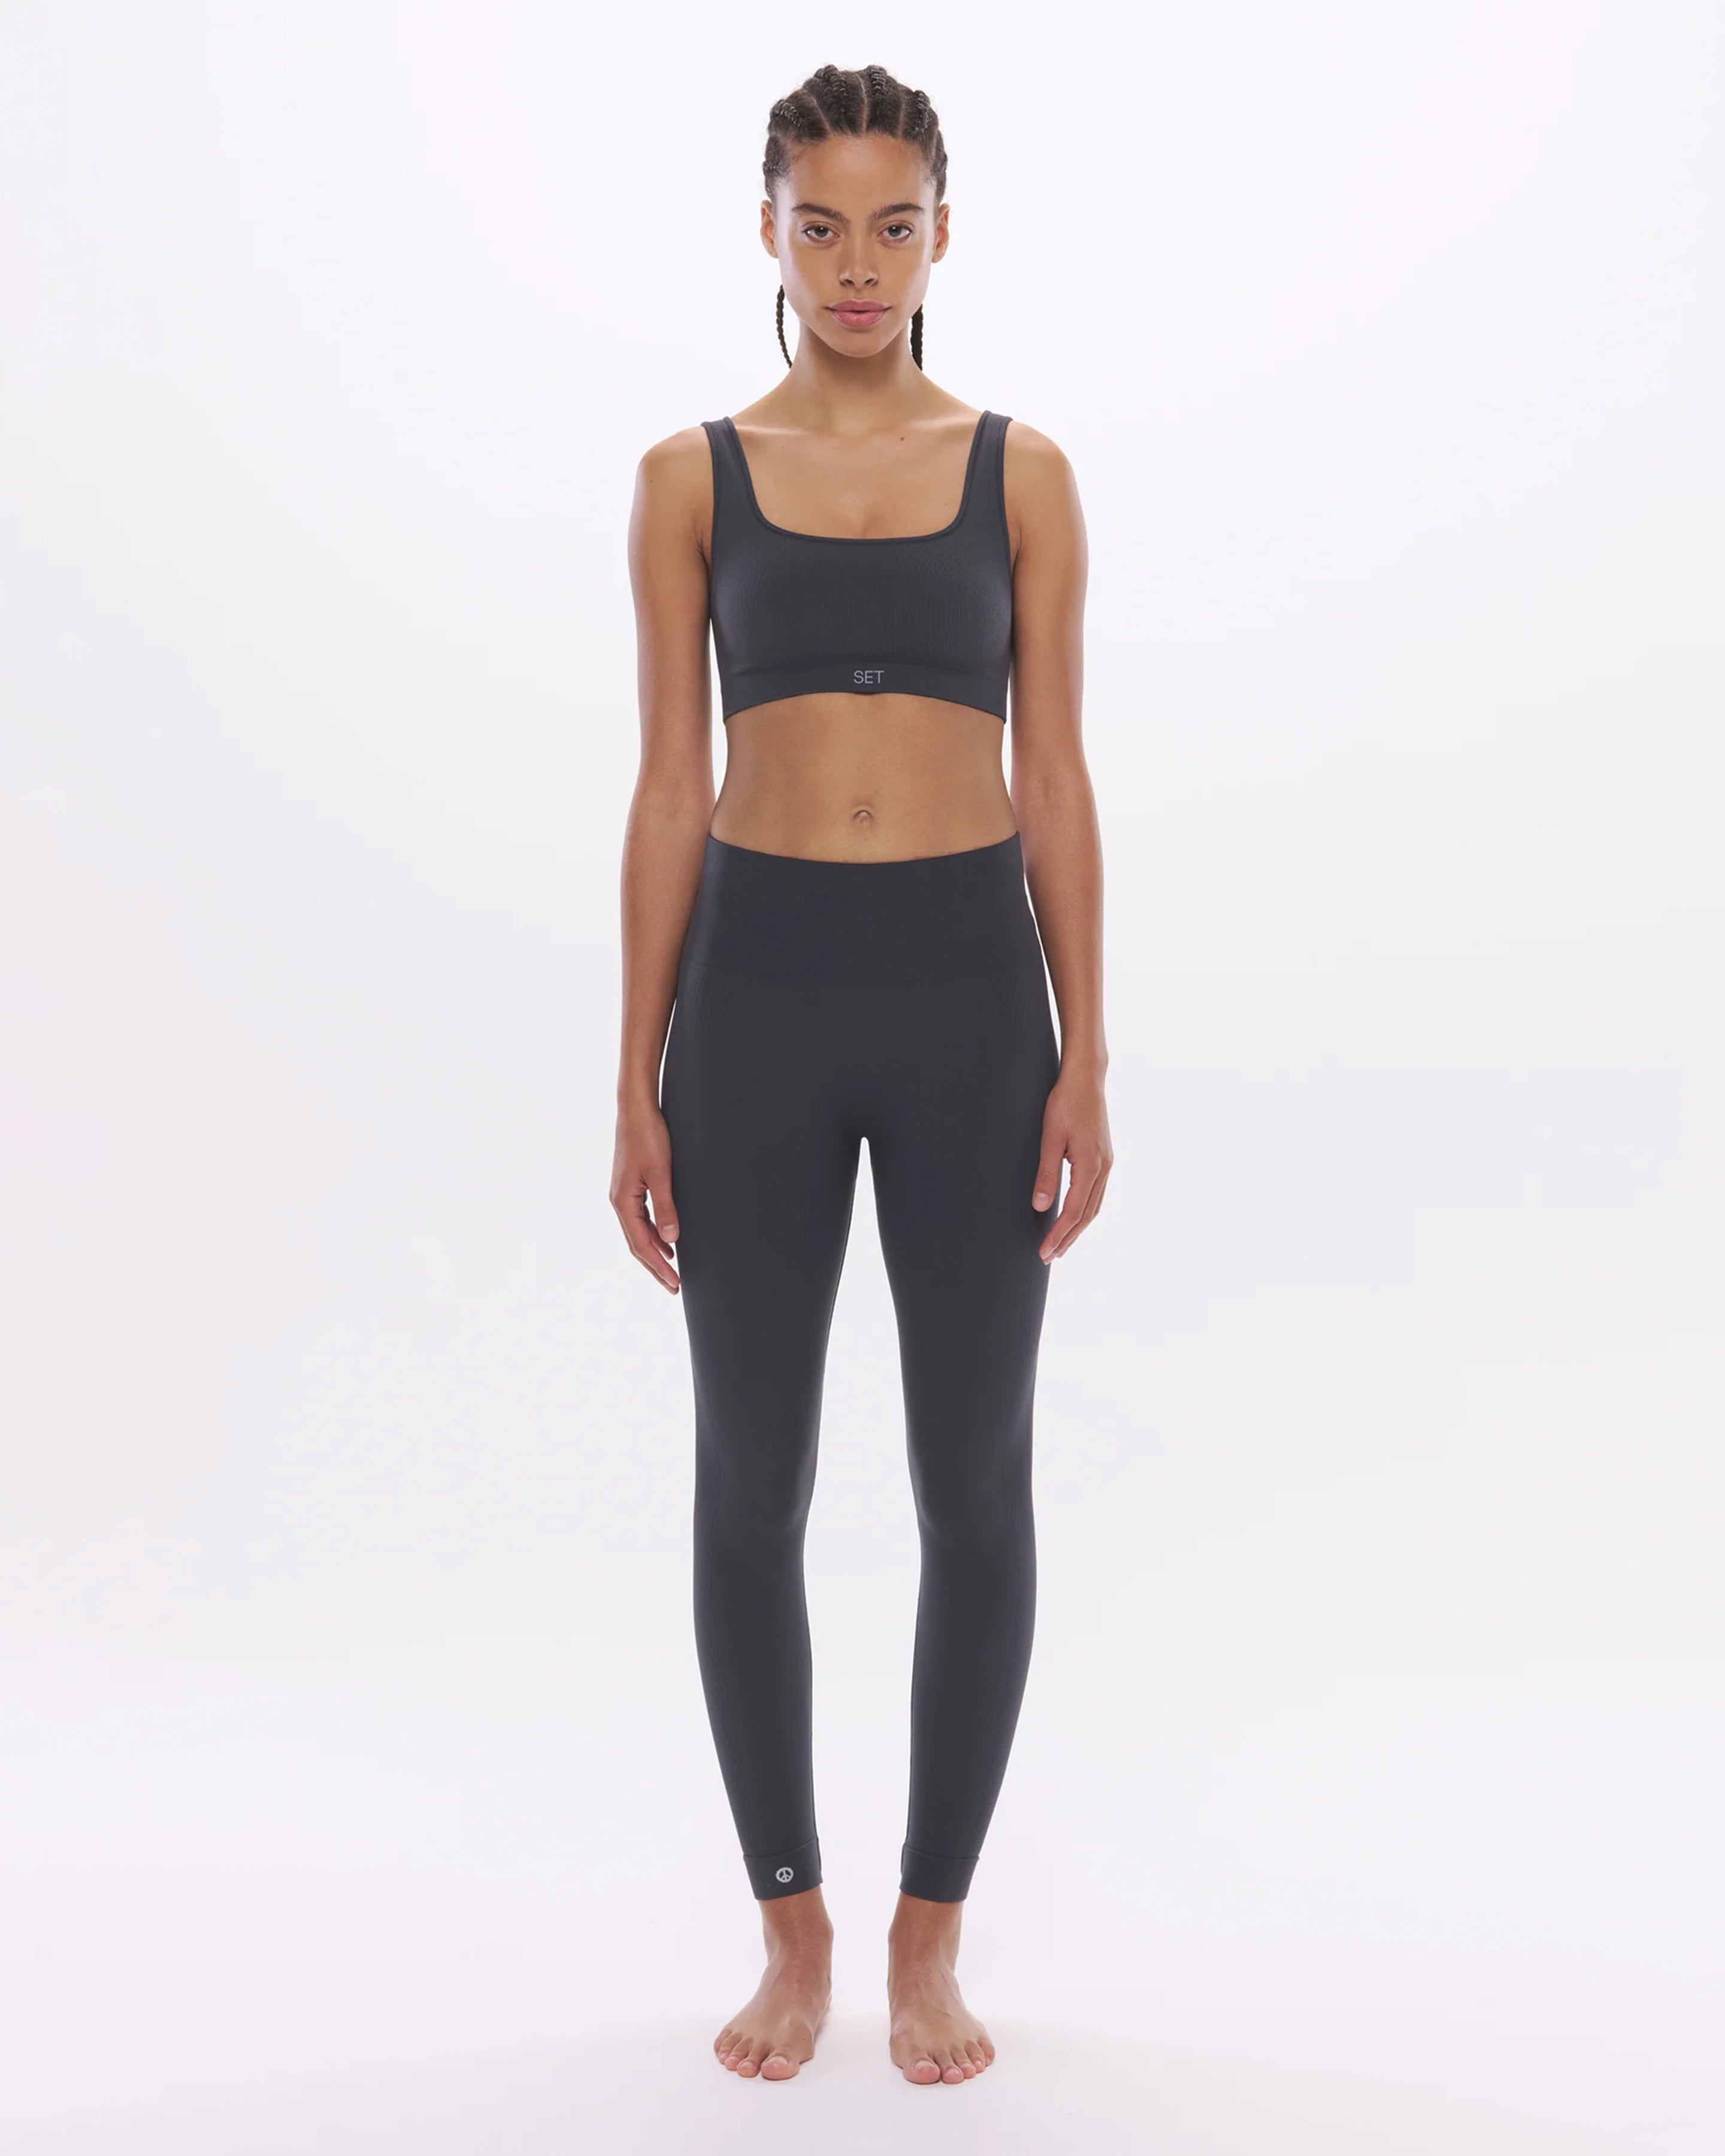 Shop the new Madhappy and lululemon collection, live now